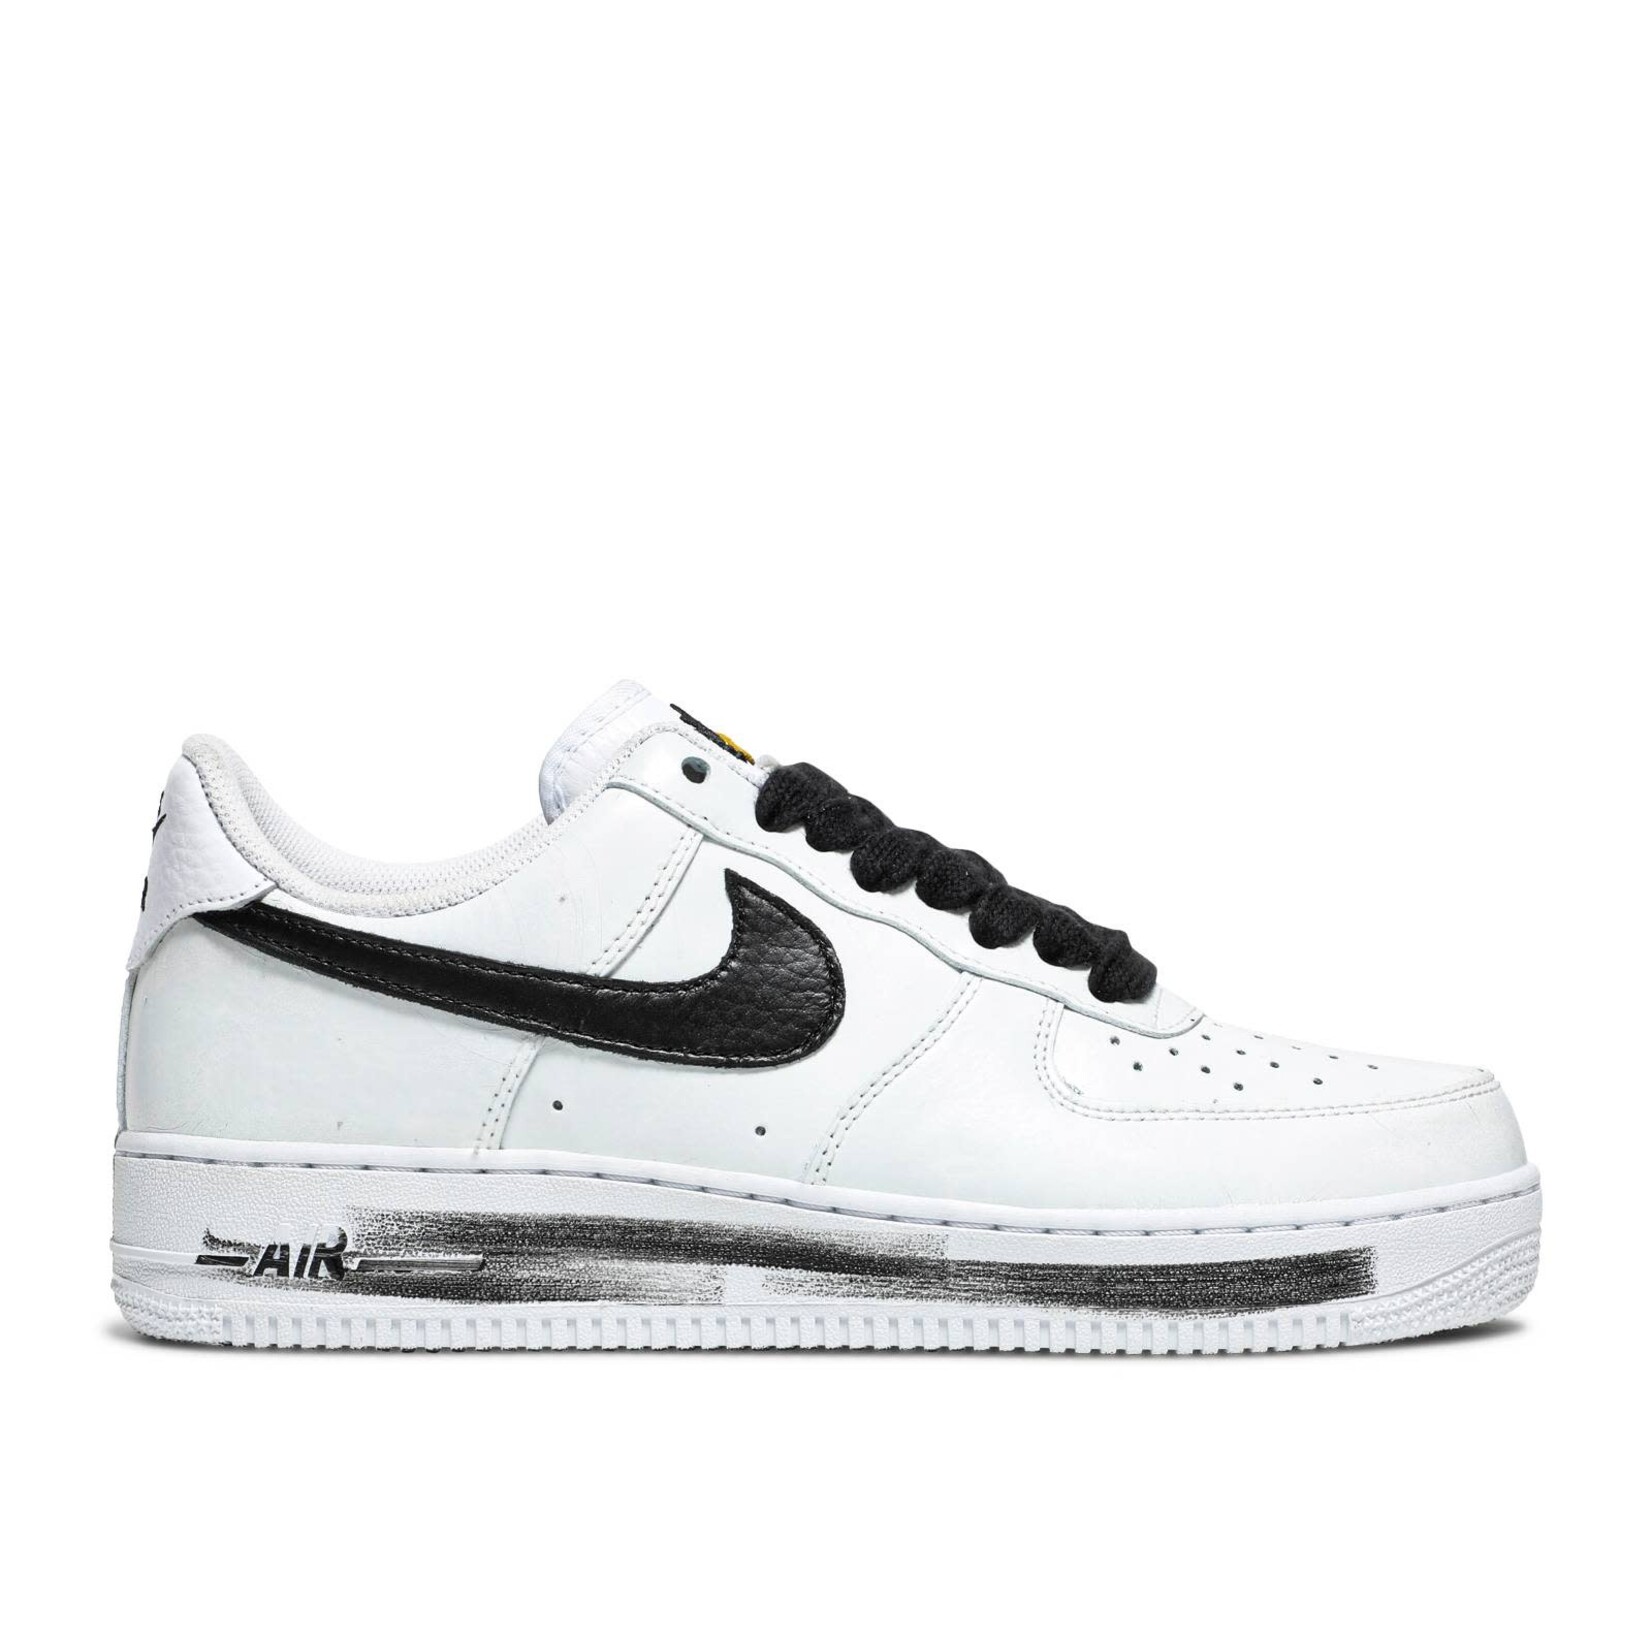 Nike Nike Air Force 1 Low G-Dragon Peaceminusone Para-Noise 2.0 Size 7.5, DS BRAND NEW